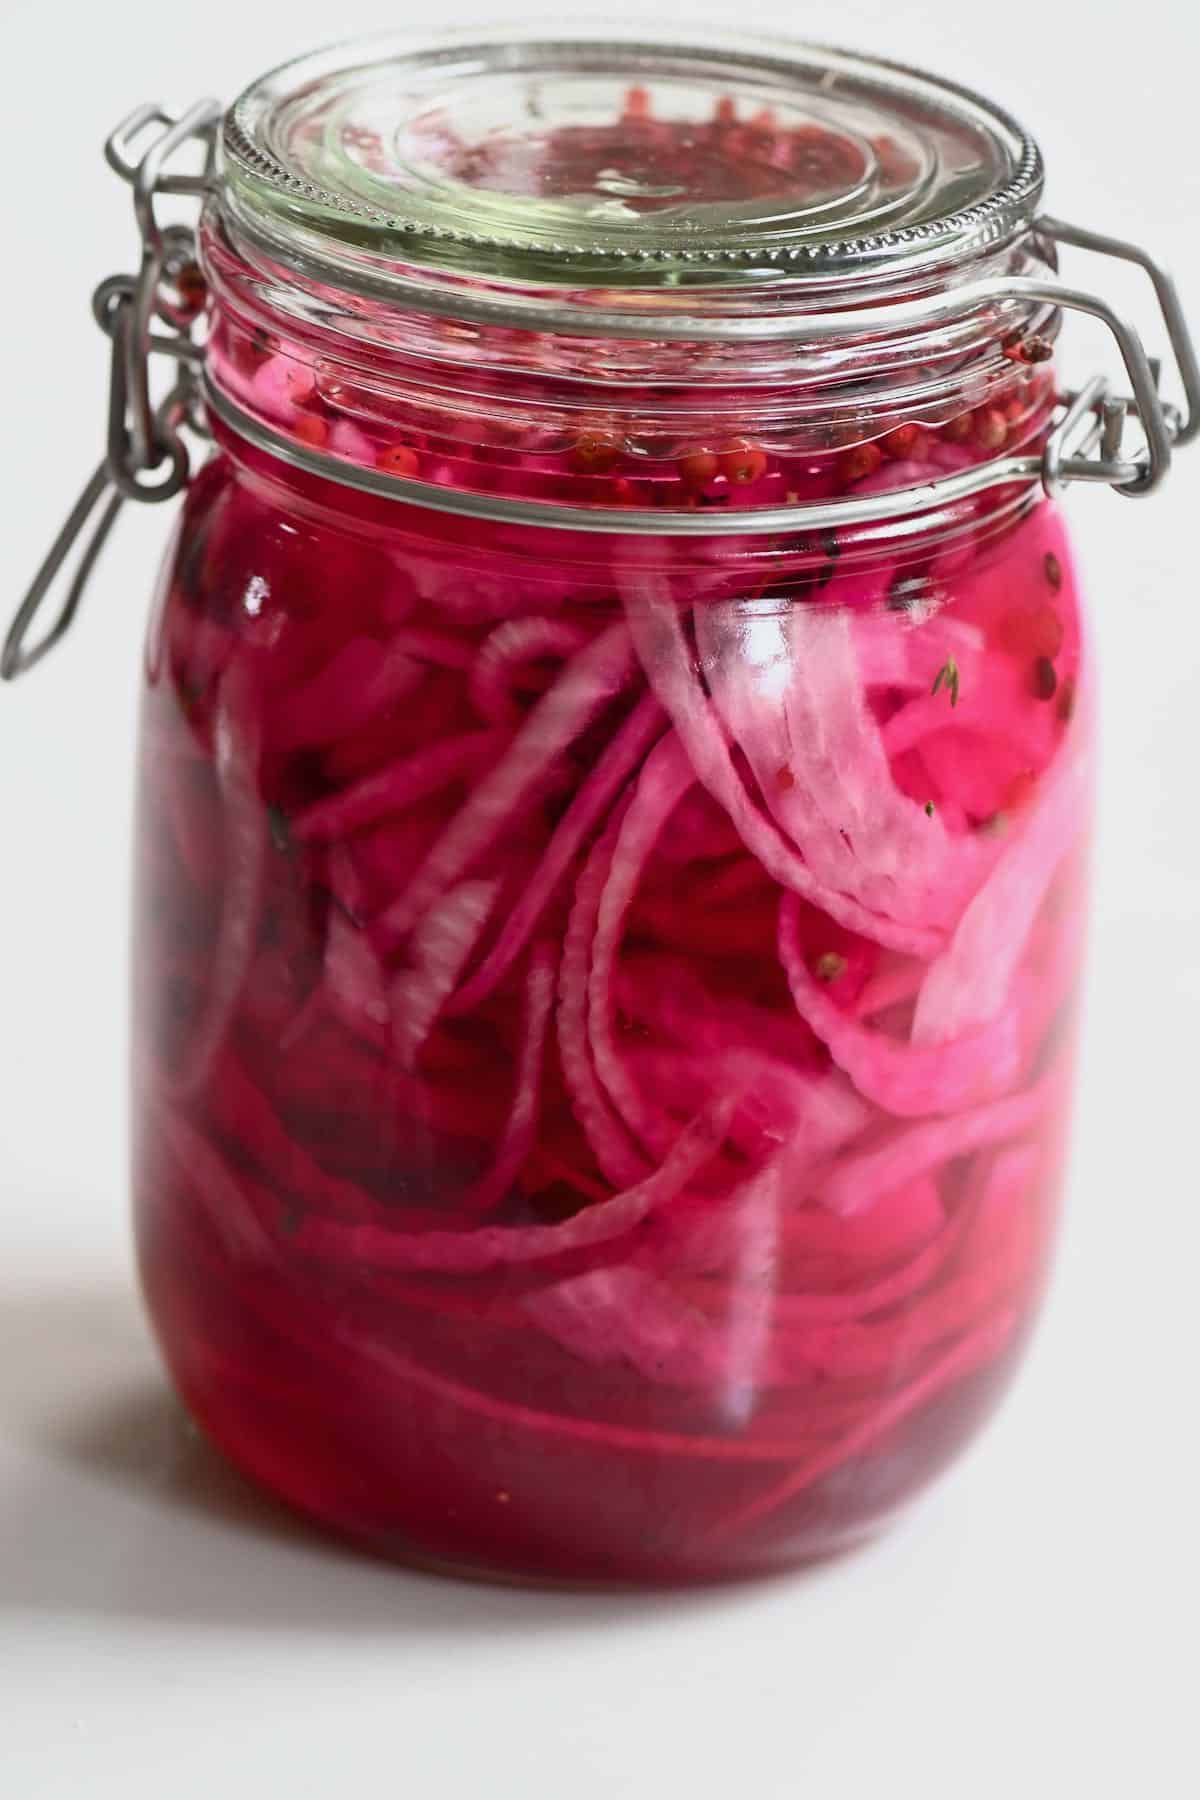 Pickled onions in a closed jar